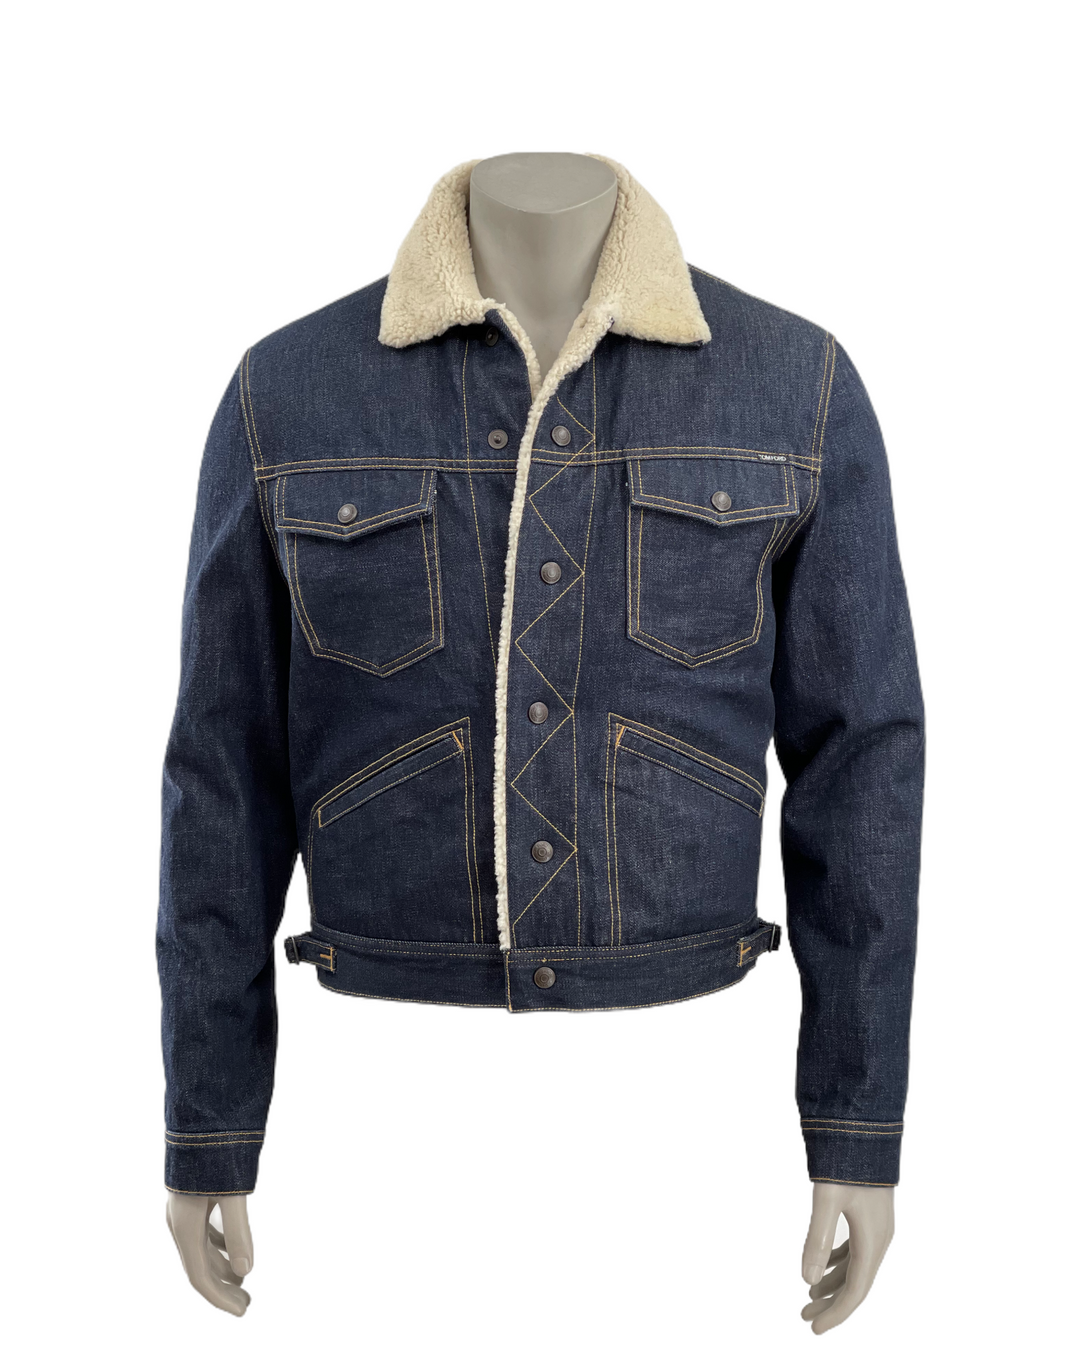 Tom Ford Denim Jacket with Shearling Lining